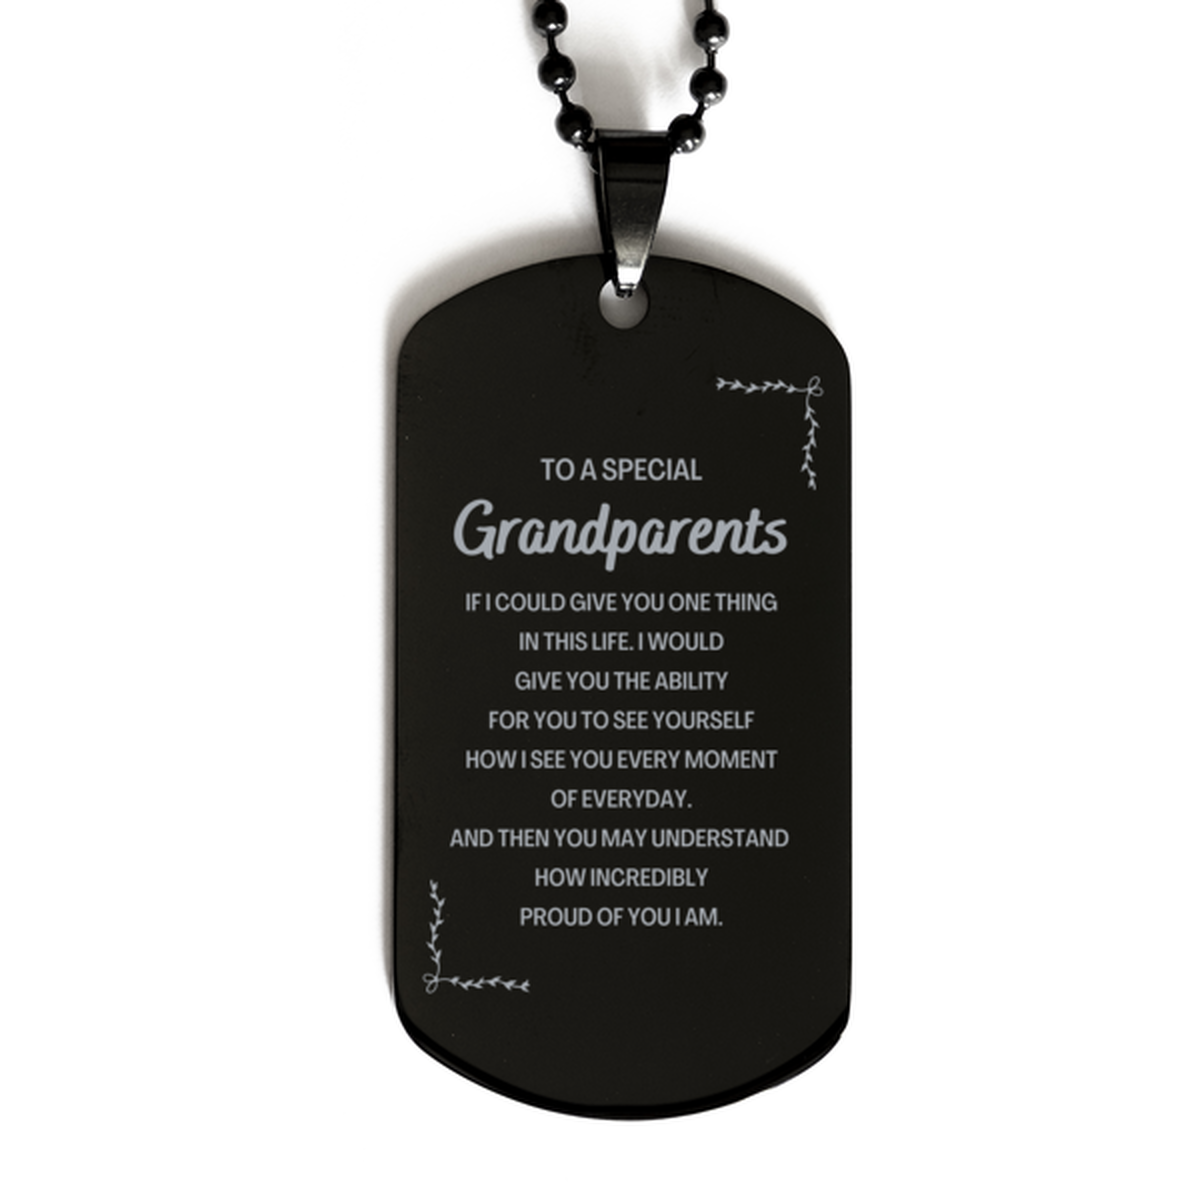 To My Grandparents Black Dog Tag, Gifts For Grandparents Engraved, Inspirational Gifts for Christmas Birthday, Epic Gifts for Grandparents To A Special Grandparents how incredibly proud of you I am